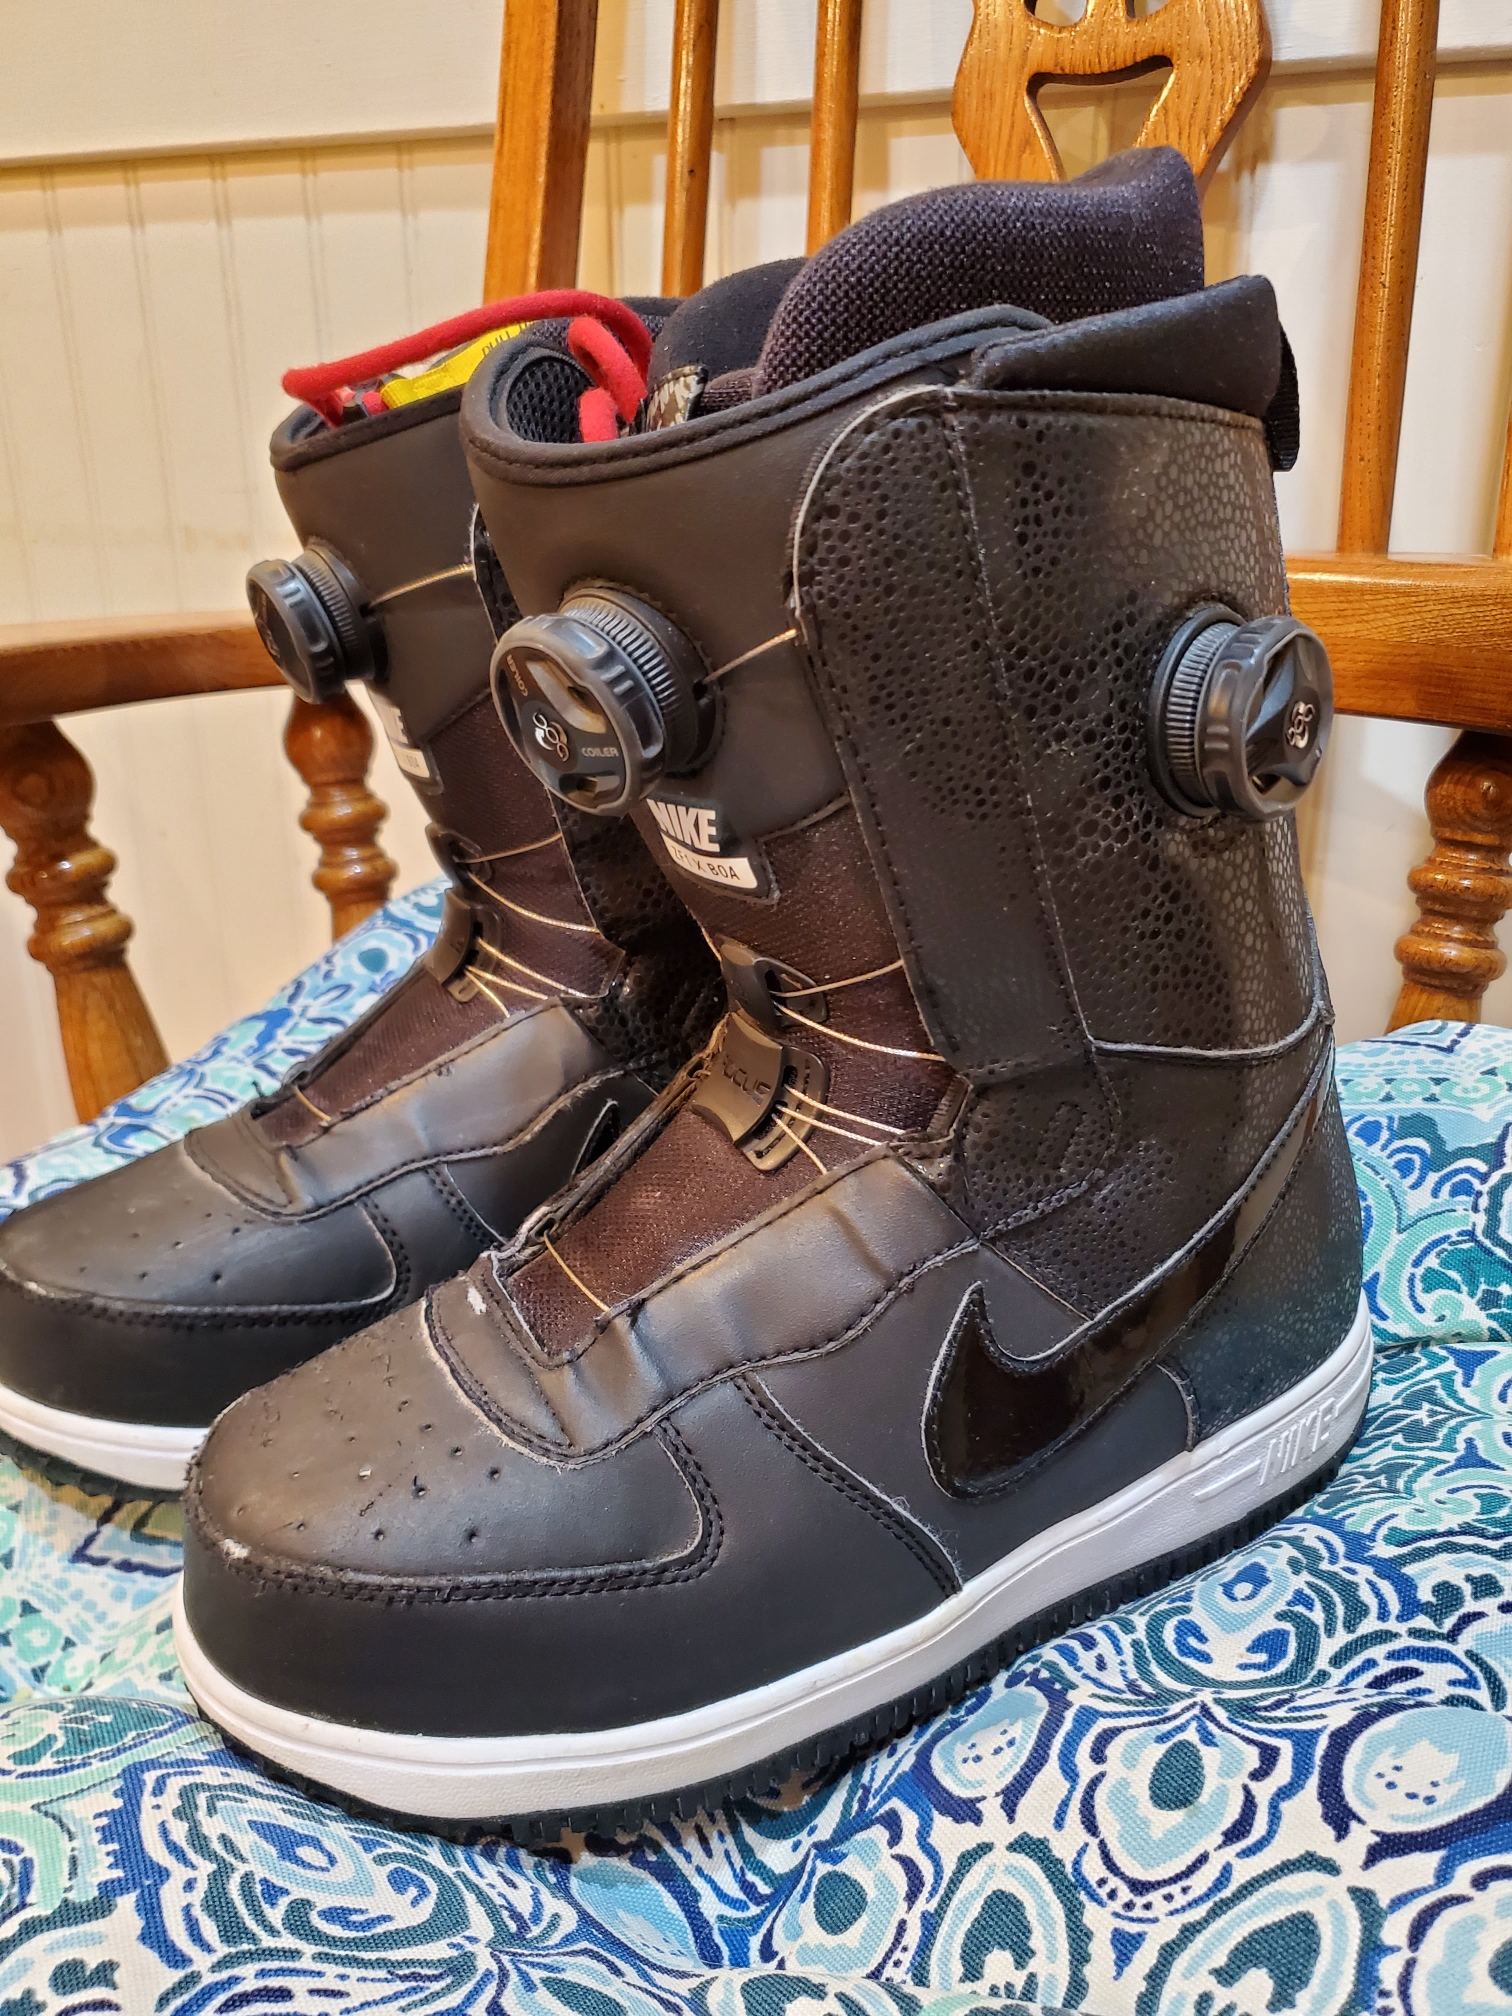 Nike Zoom Force 1 x BOA ZF1 Black WITH BOA Snowboard Boots Size US 6.5.